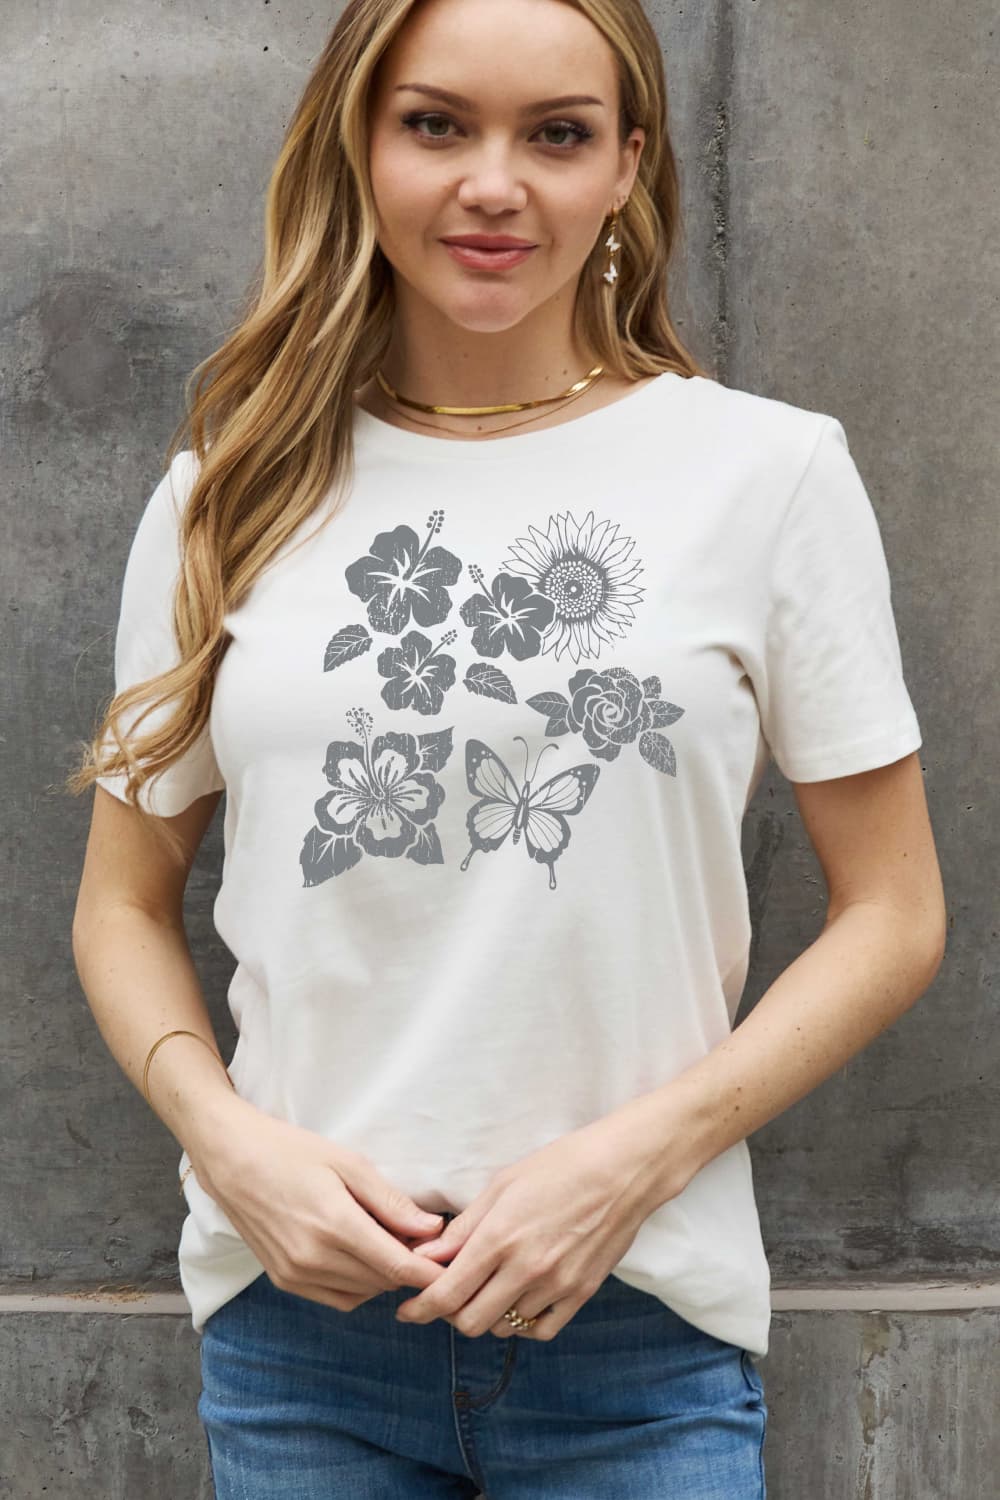 Dim Gray Simply Love Full Size Flower & Butterfly Graphic Cotton Tee